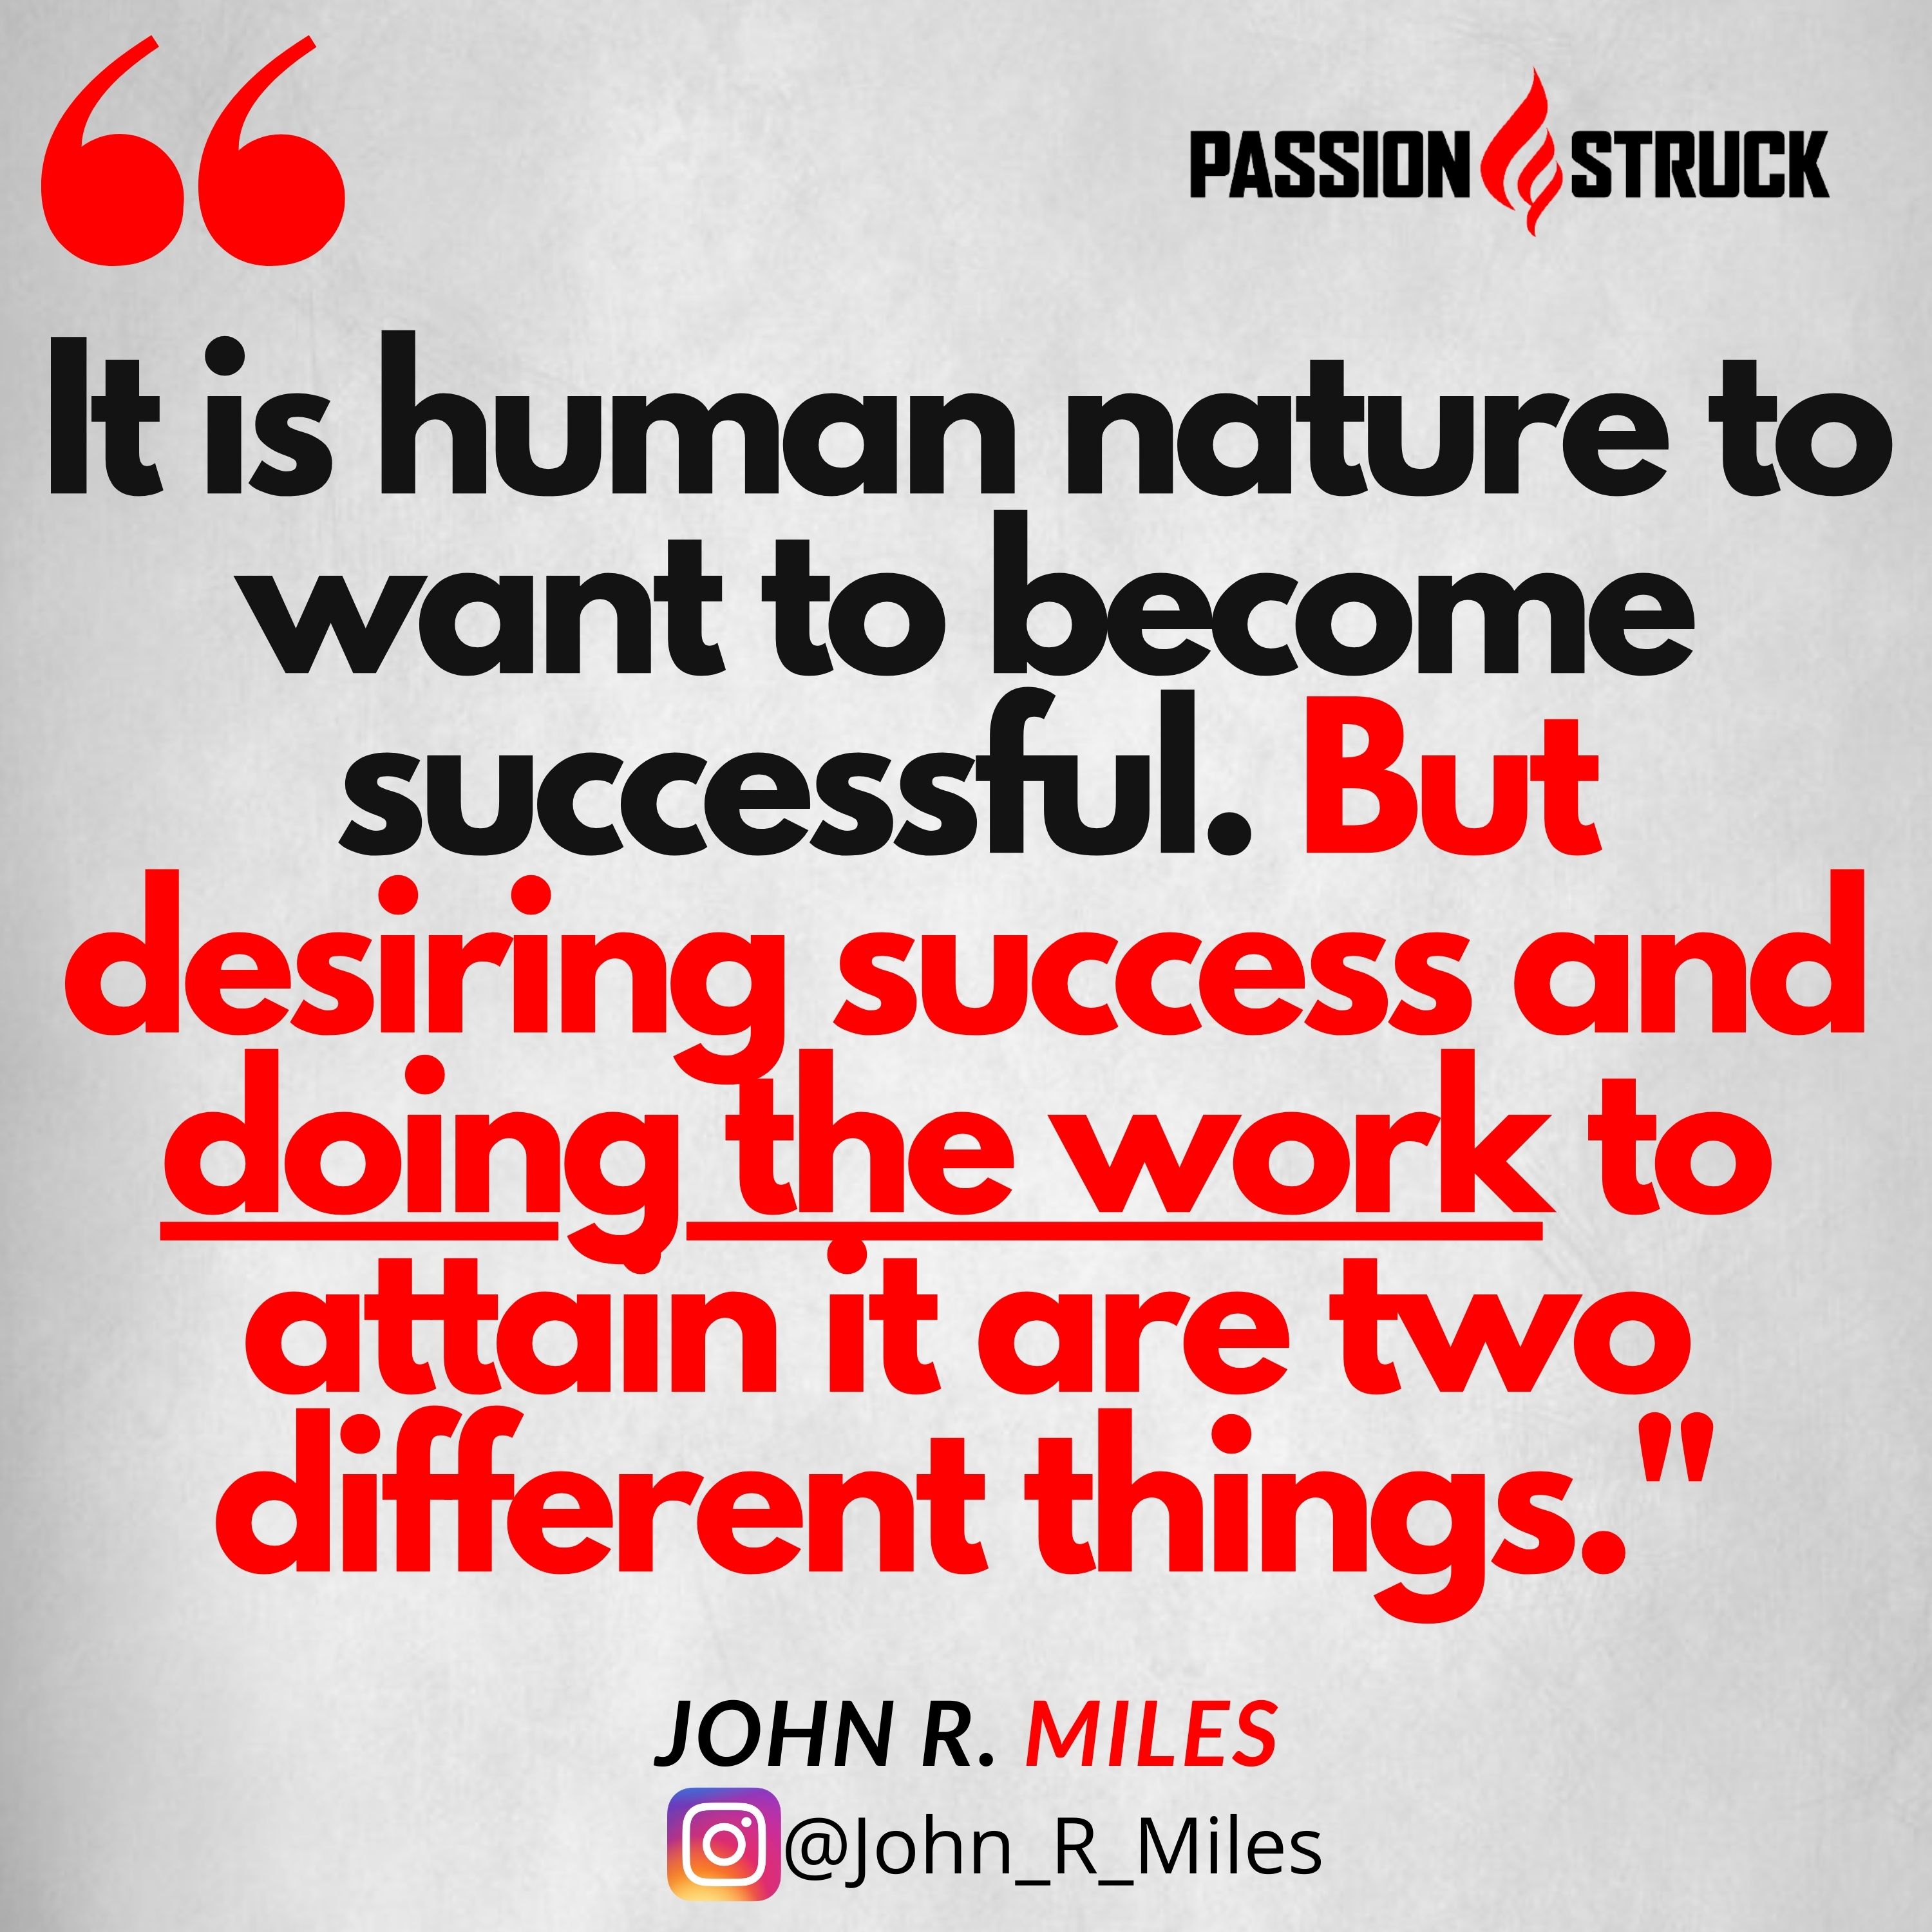 Quote by John R. Miles on enduring pain to achieve success